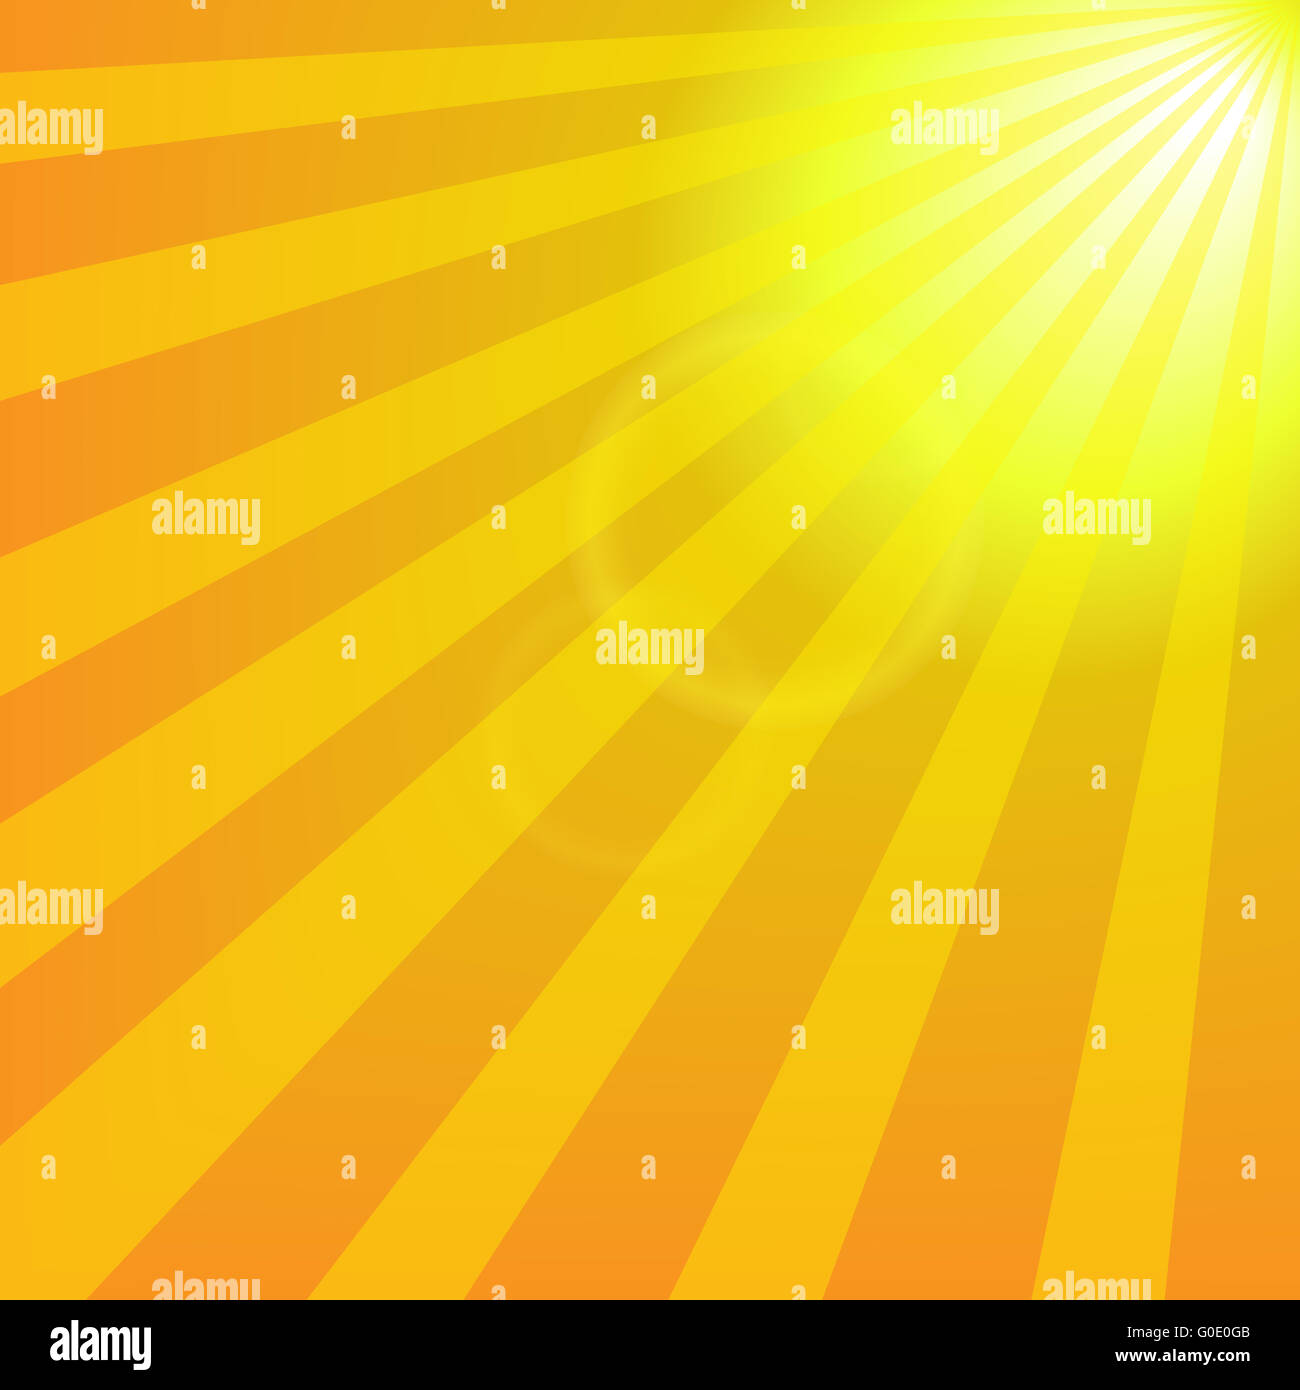 Bright yellow sun with rays abstract travel background Stock Photo